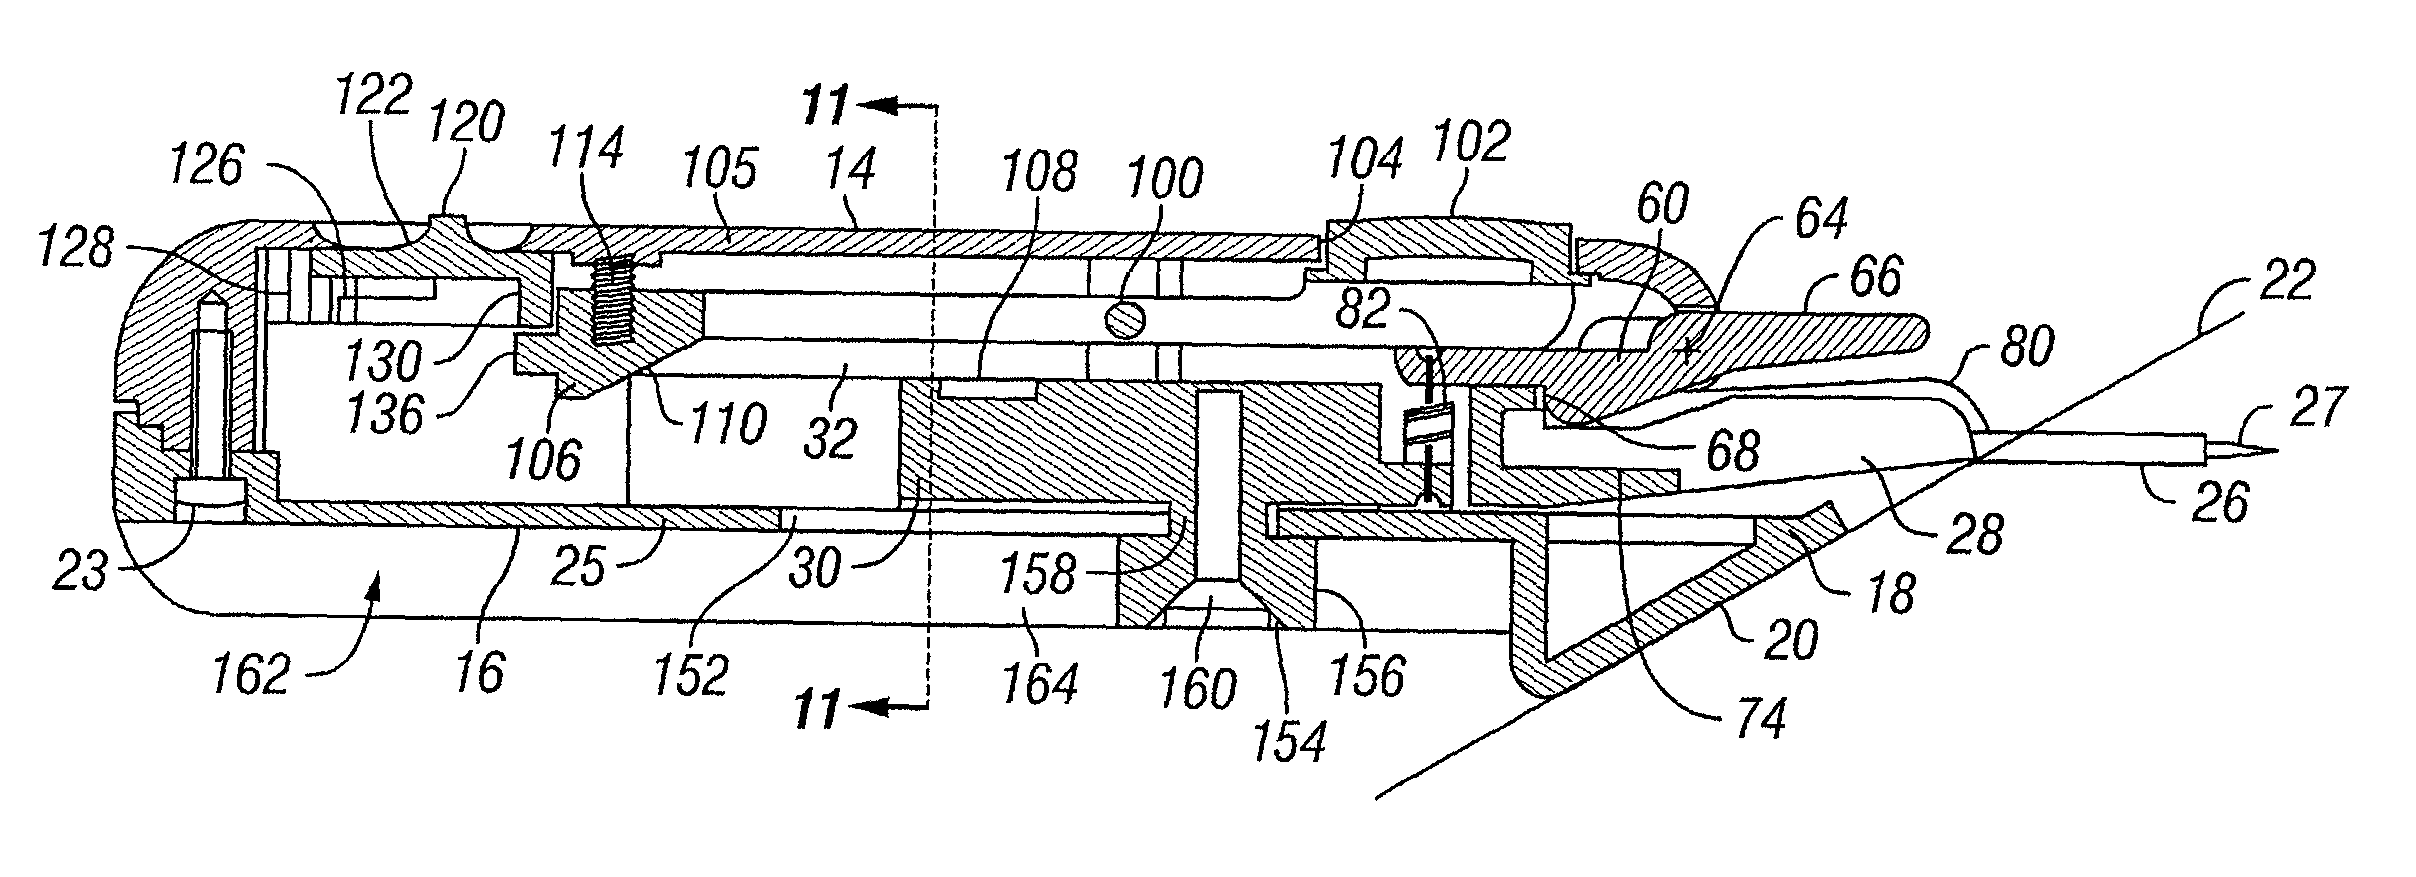 Transcutaneous inserter for low-profile infusion sets